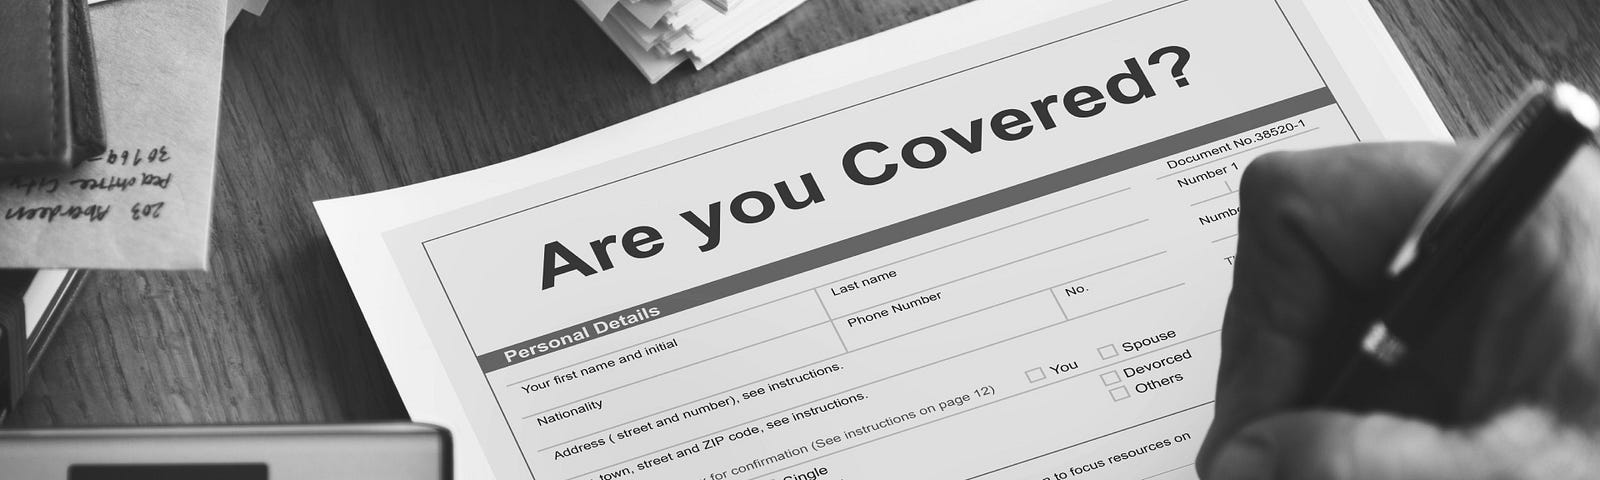 Are you covered under a health insurance